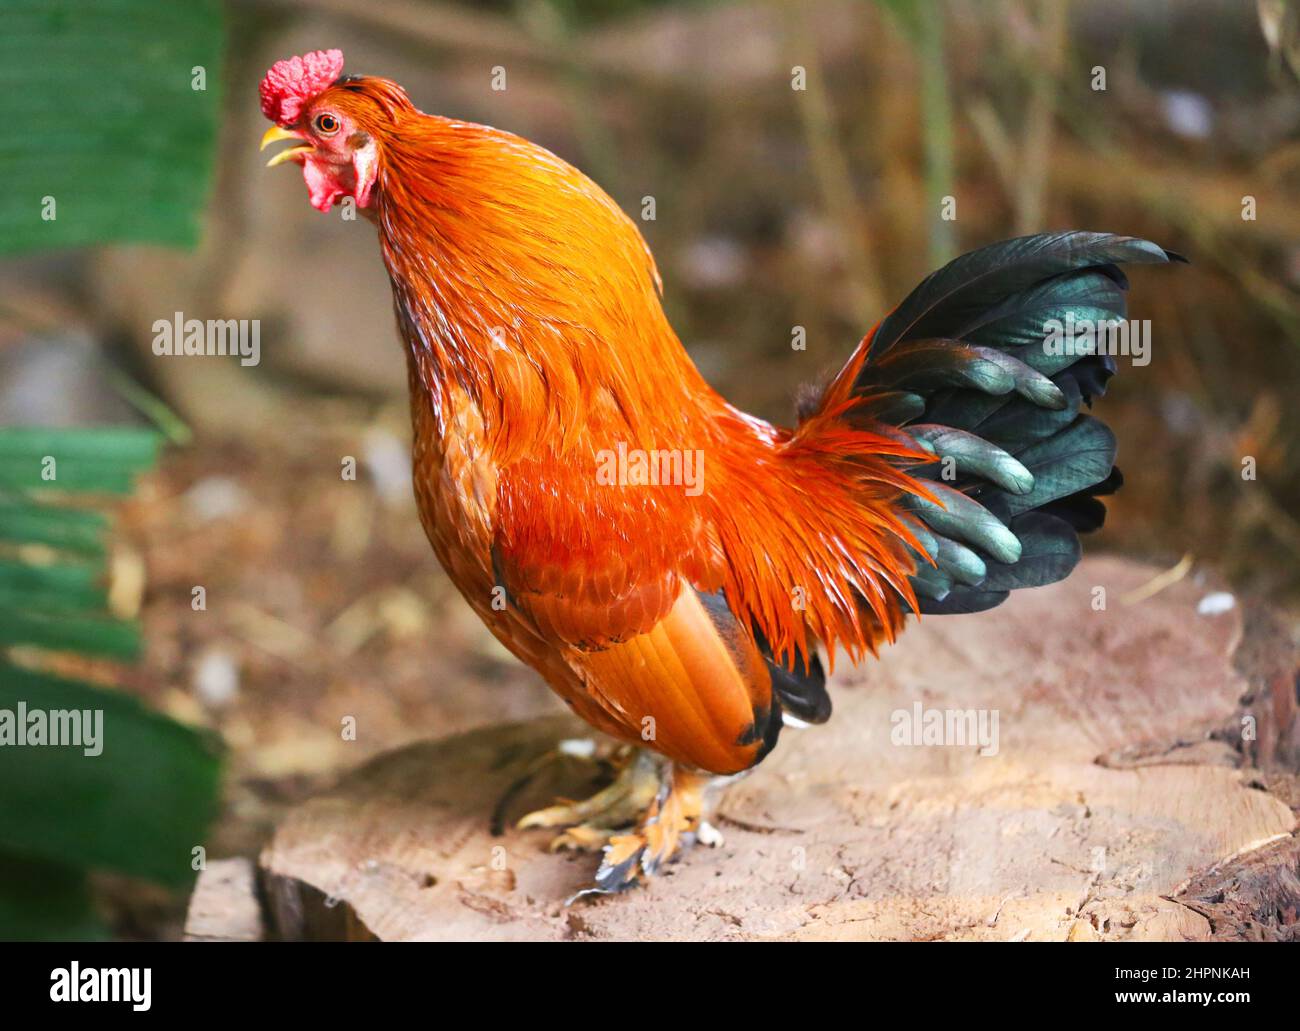 beautiful multicolored red rooster stands on a stump photographed in close-up Stock Photo